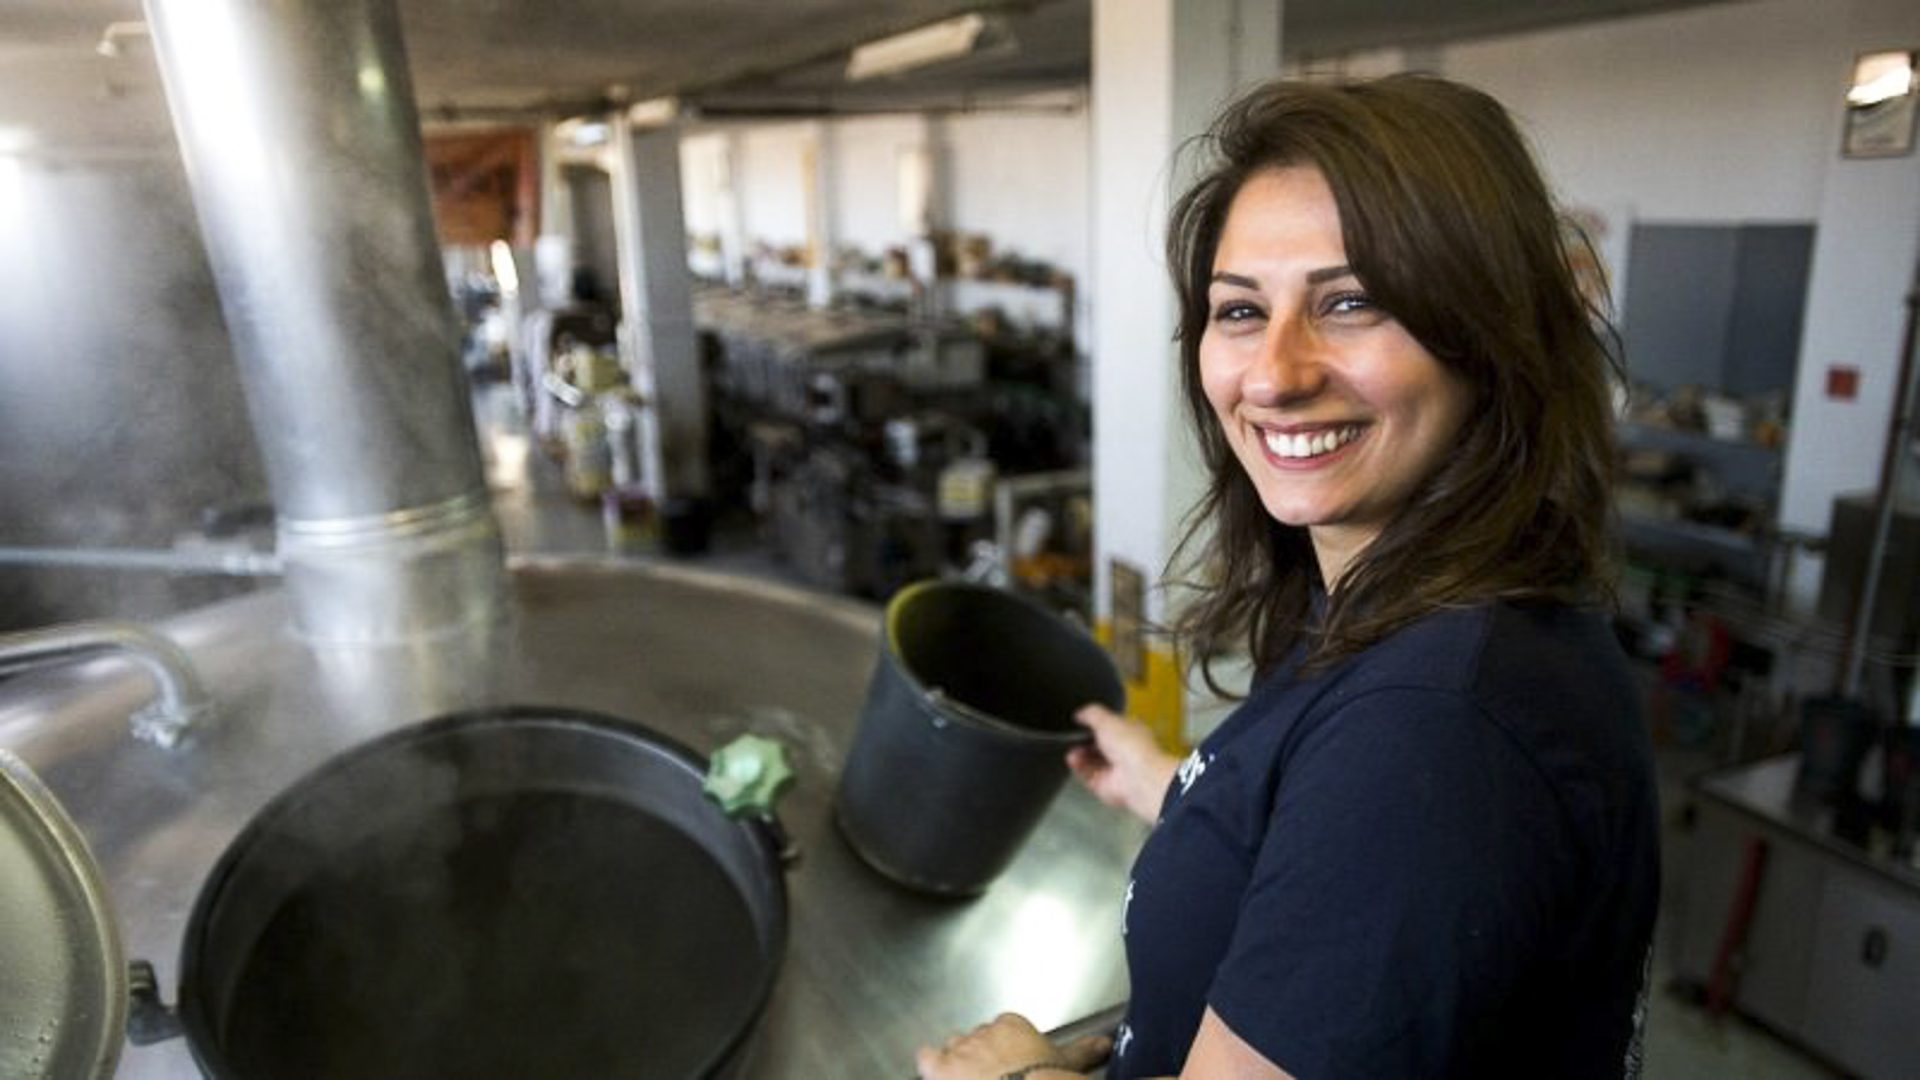 “After every challenge, I get stronger.” Meet the Middle East’s first female brewer